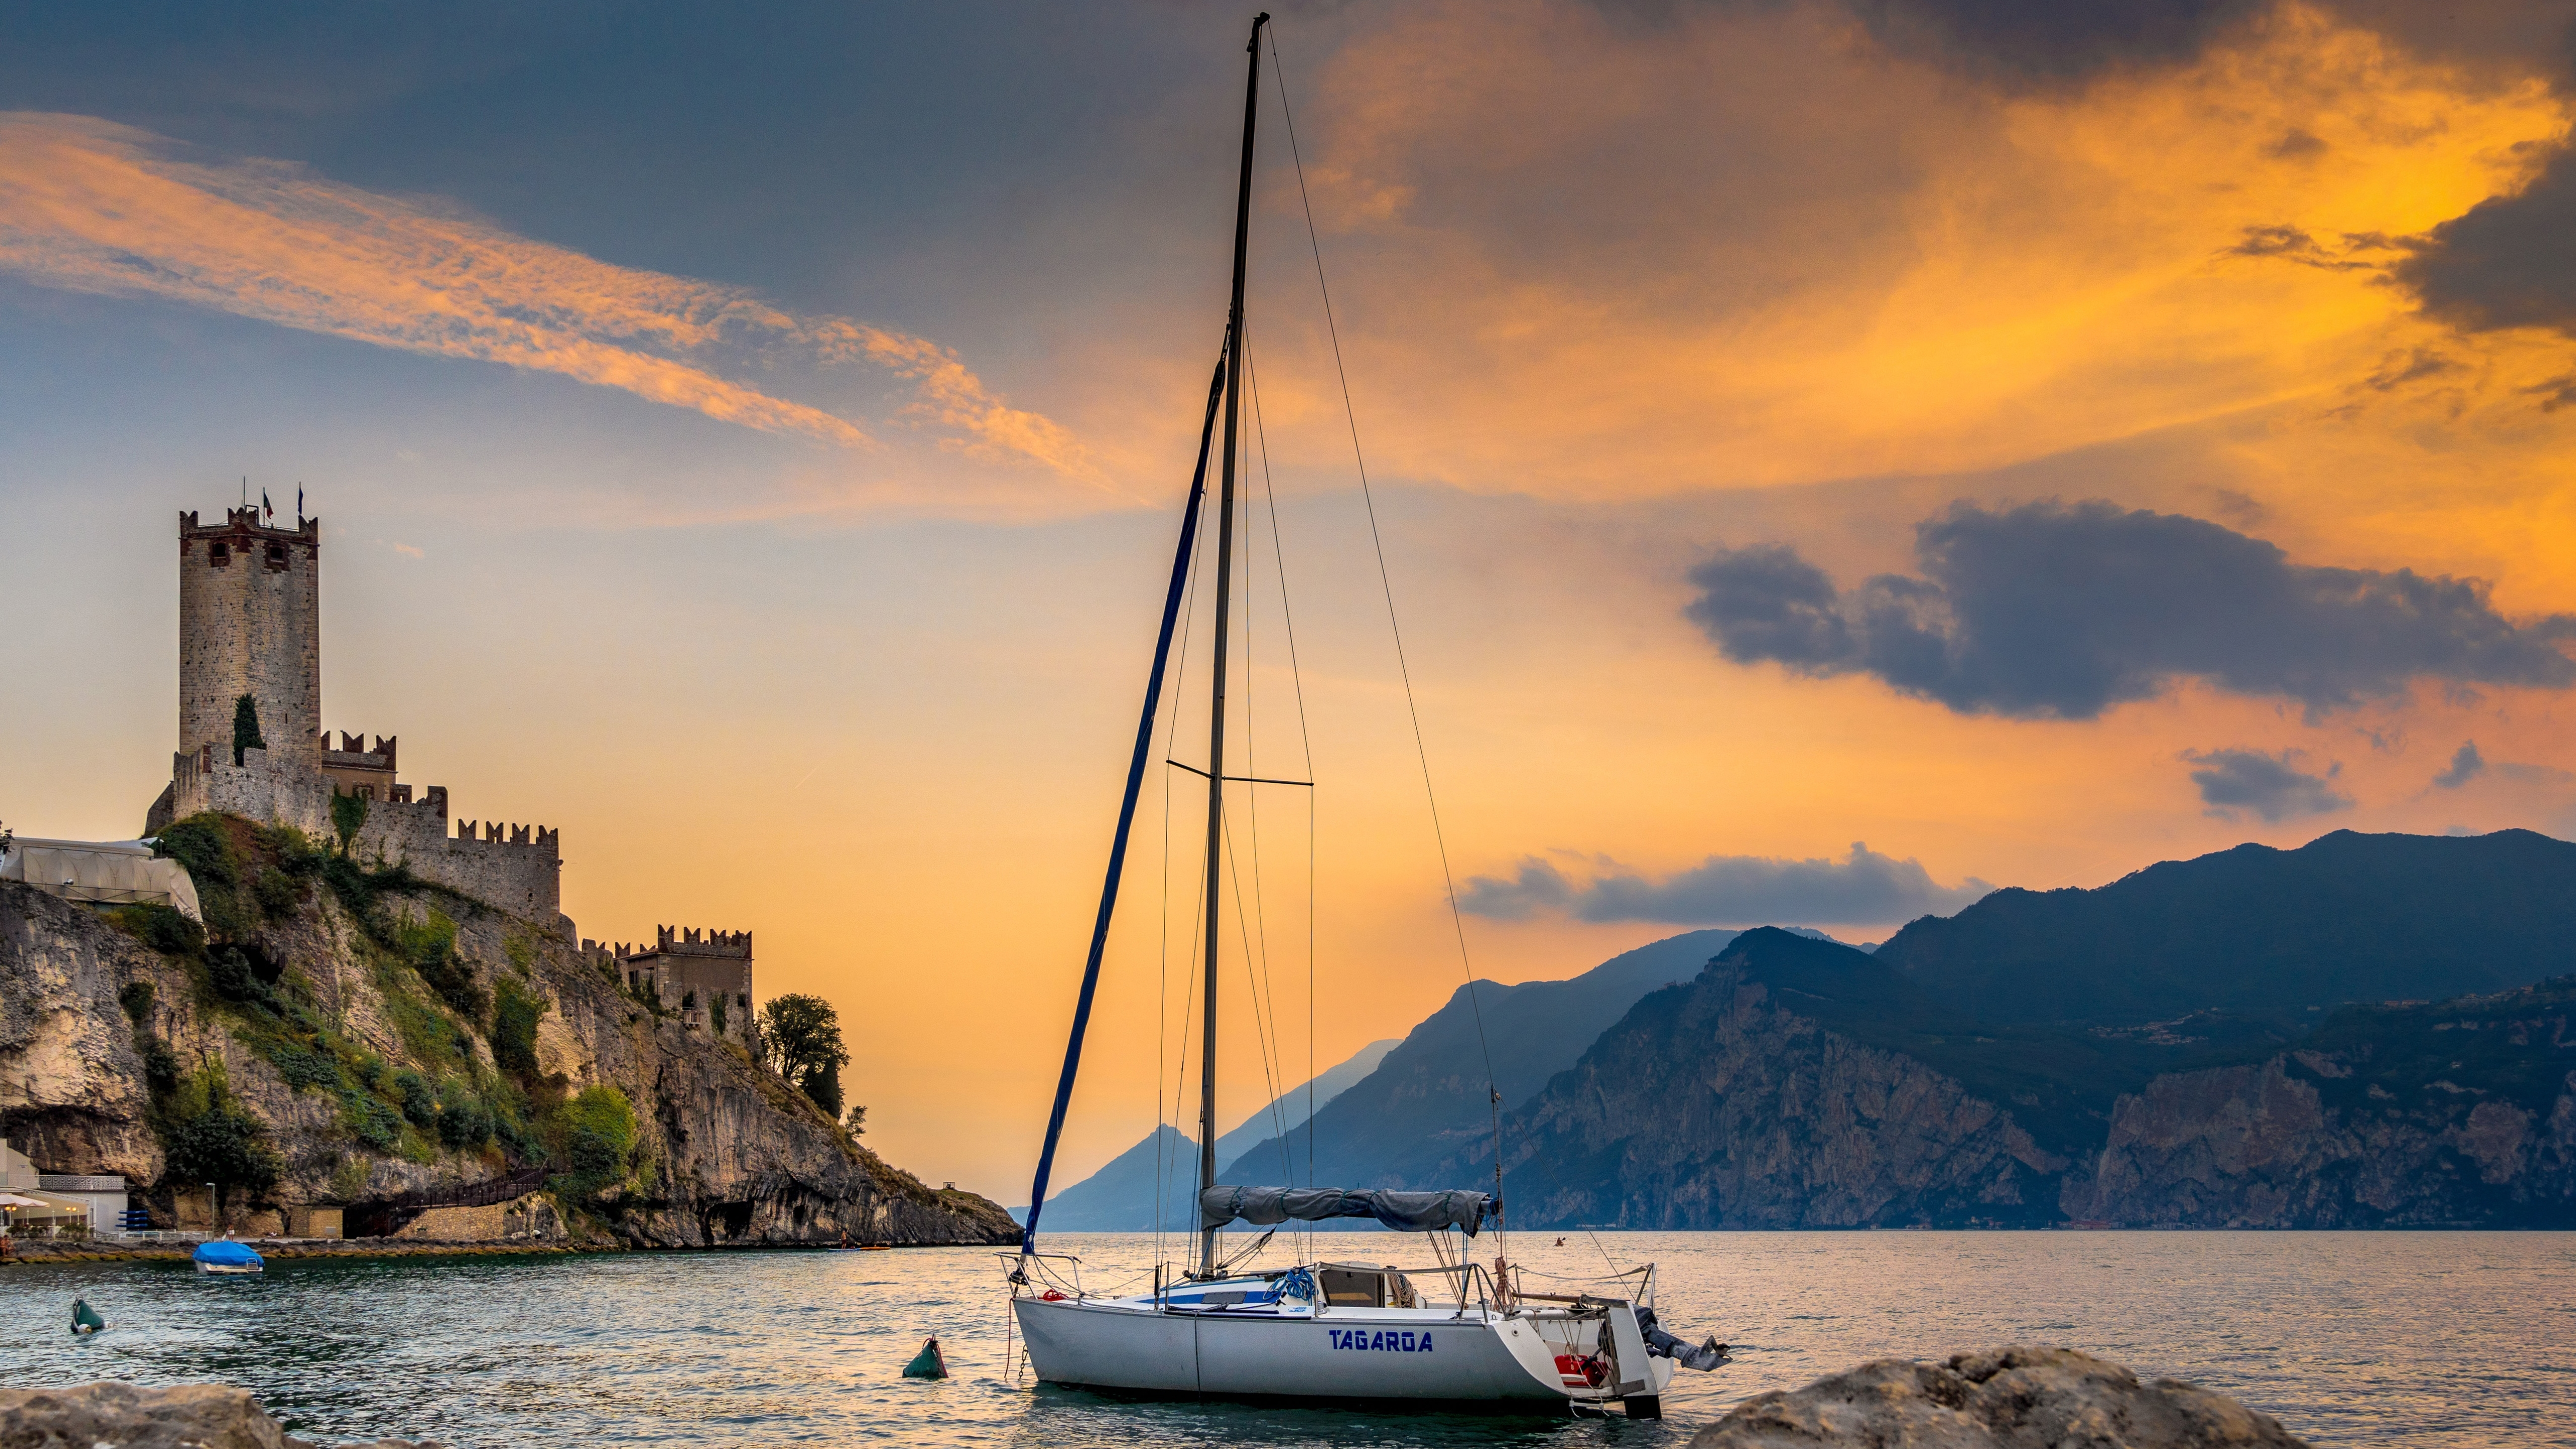 Italy Lake Garda Boat Sunset Castle Clouds Sky Water 5120x2880